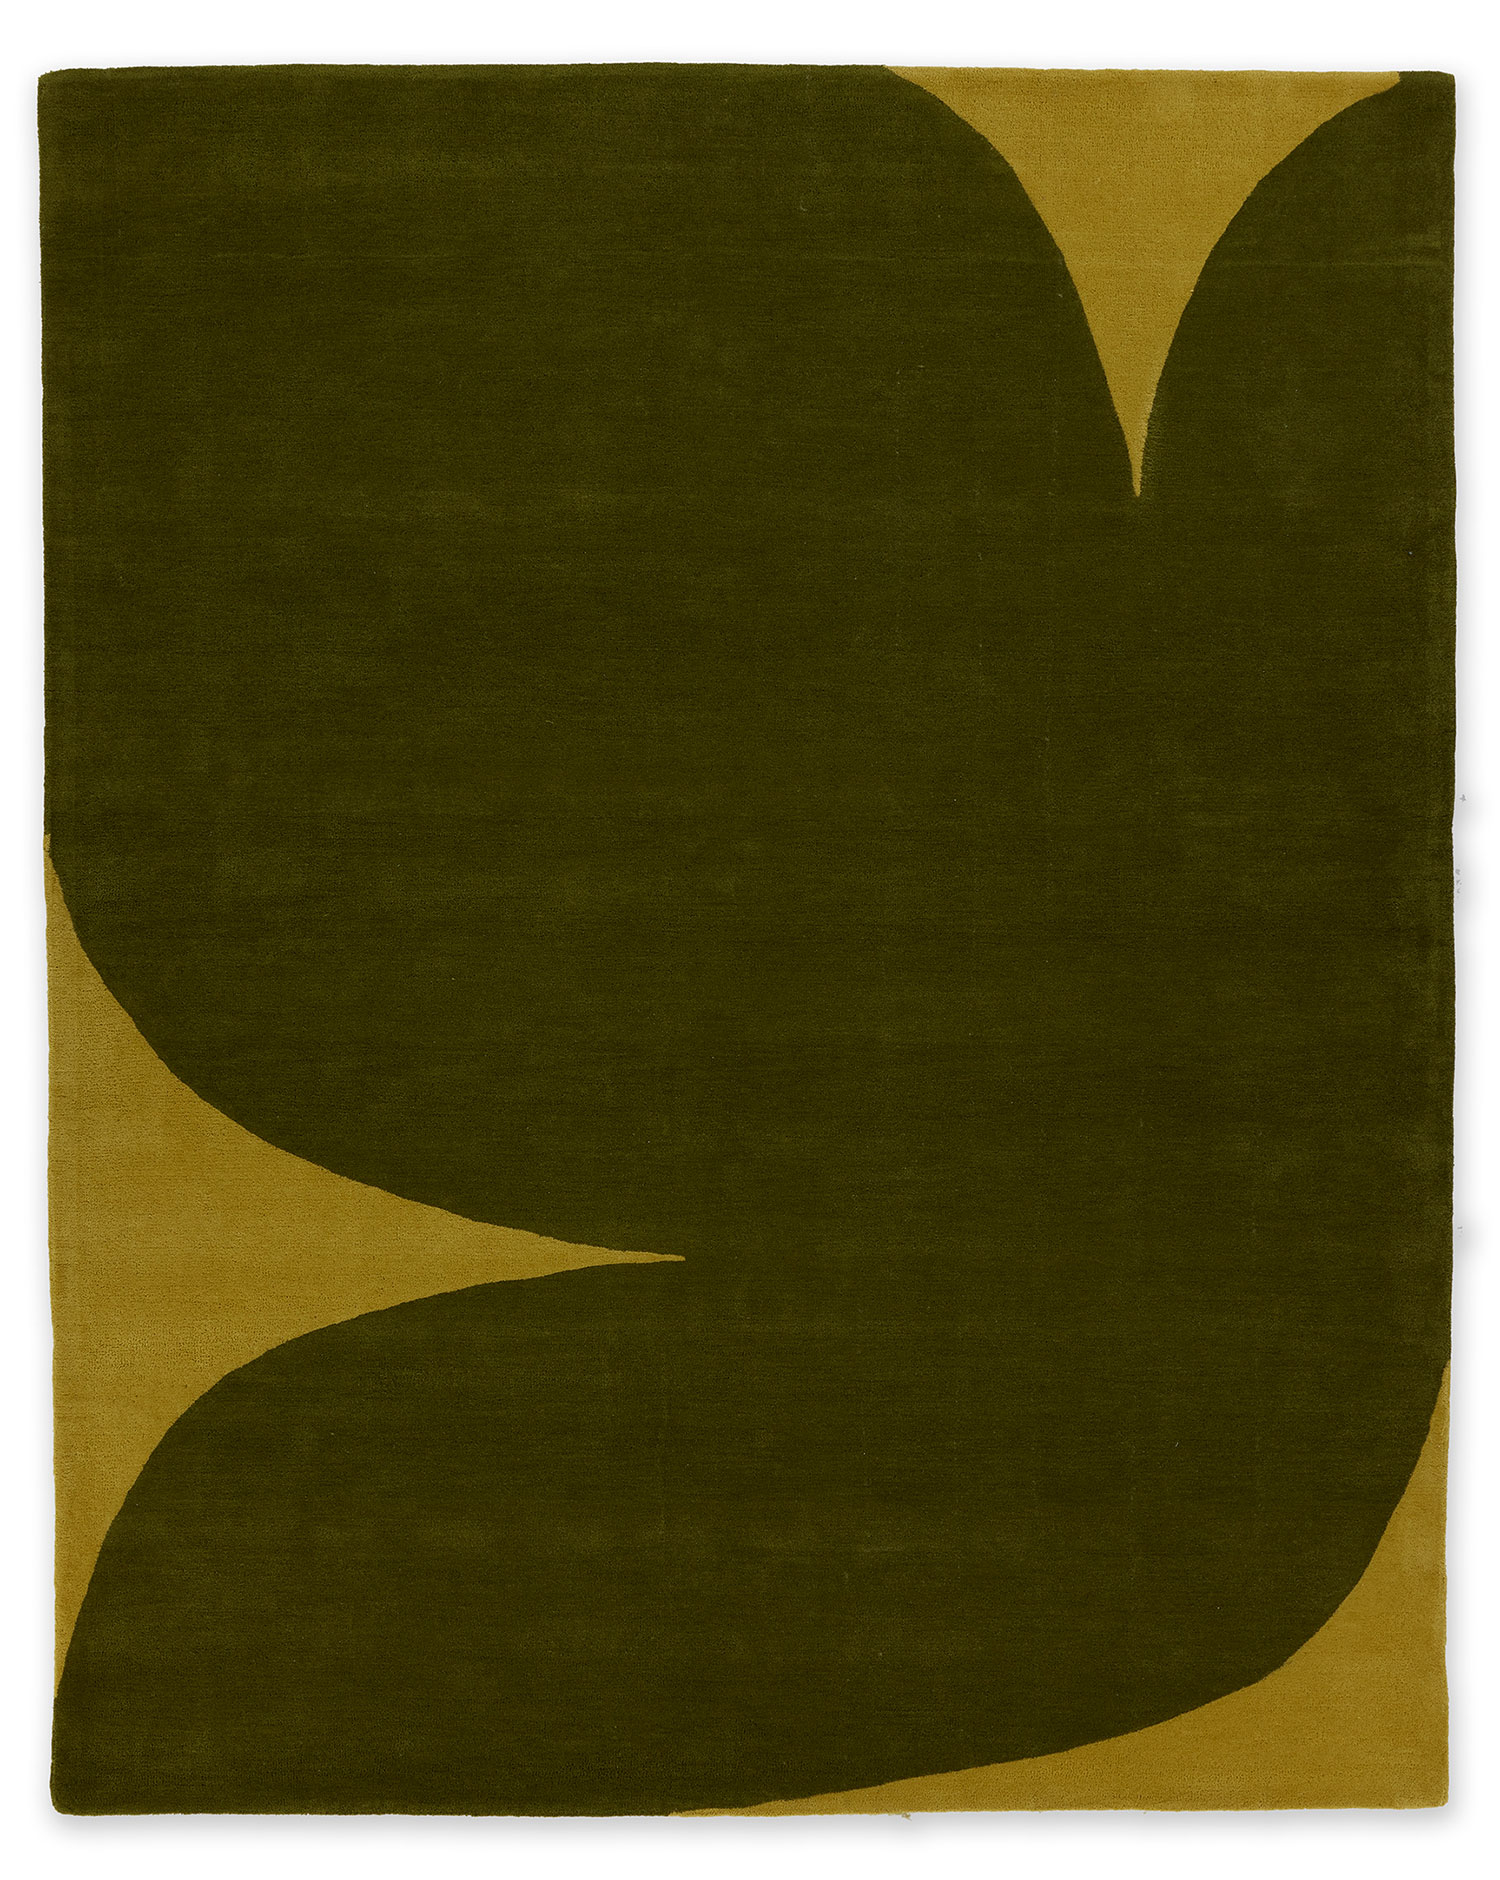 A large green, hand tufted rug with an abstract dove pattern on it by angela adams